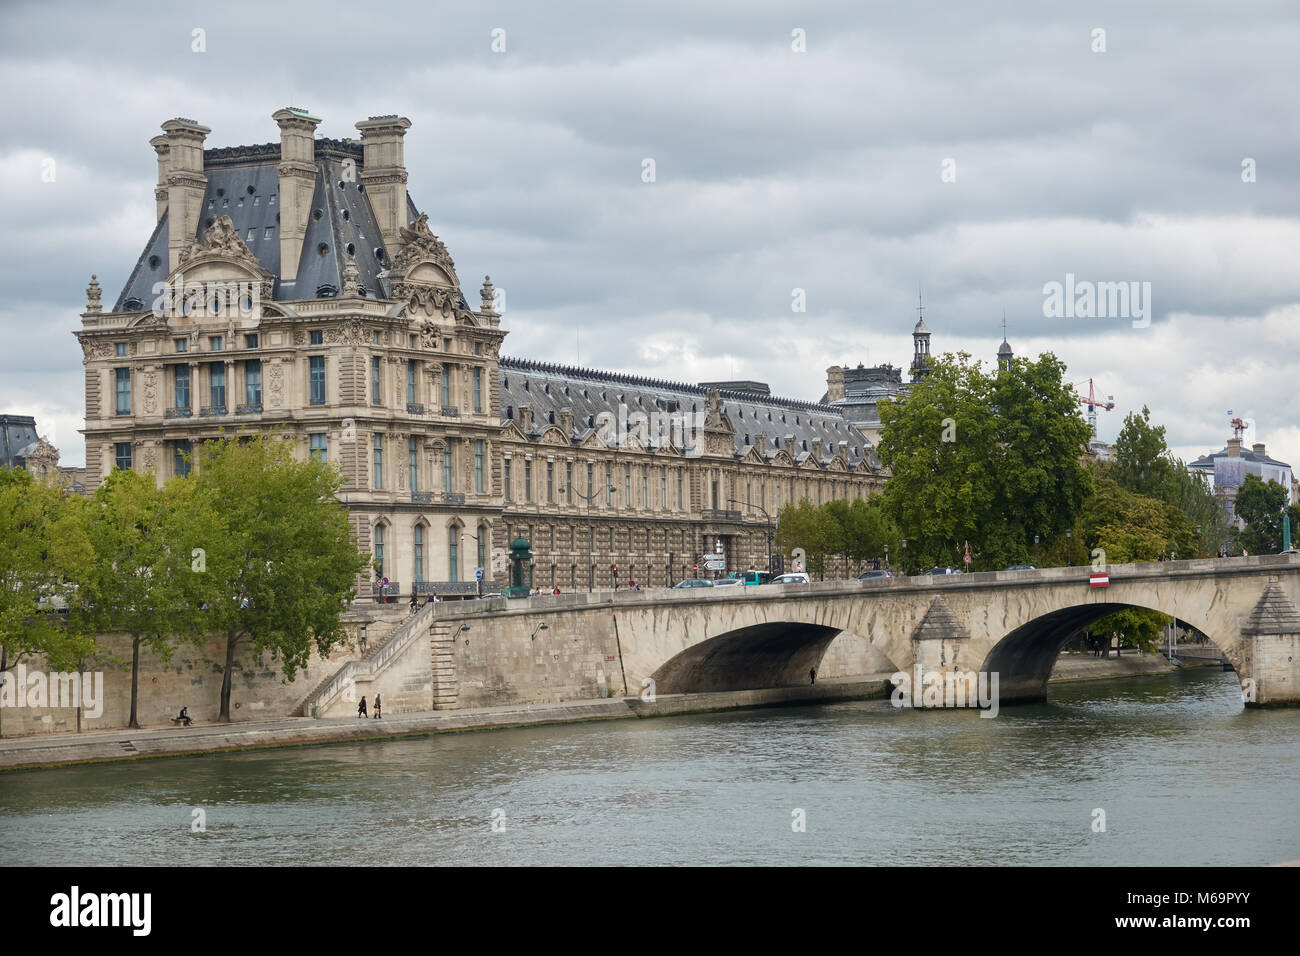 Architecture of Paris. The Tuileries Palace along the Seine River. Stock Photo